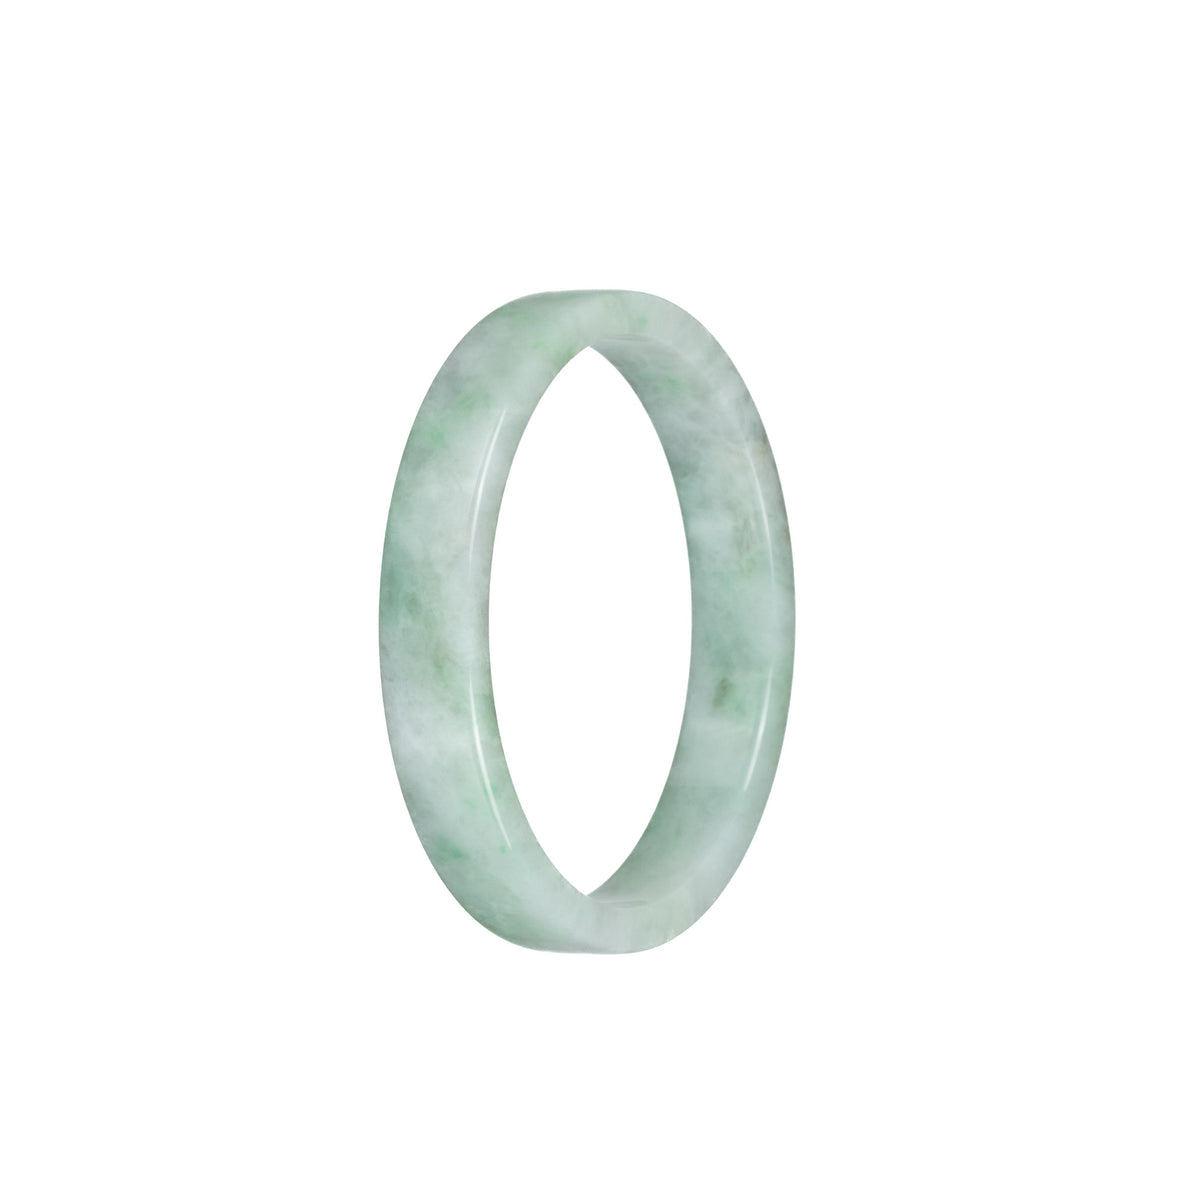 Certified Untreated Pale Green with Green Pattern Traditional Jade Bangle - 52mm Flat